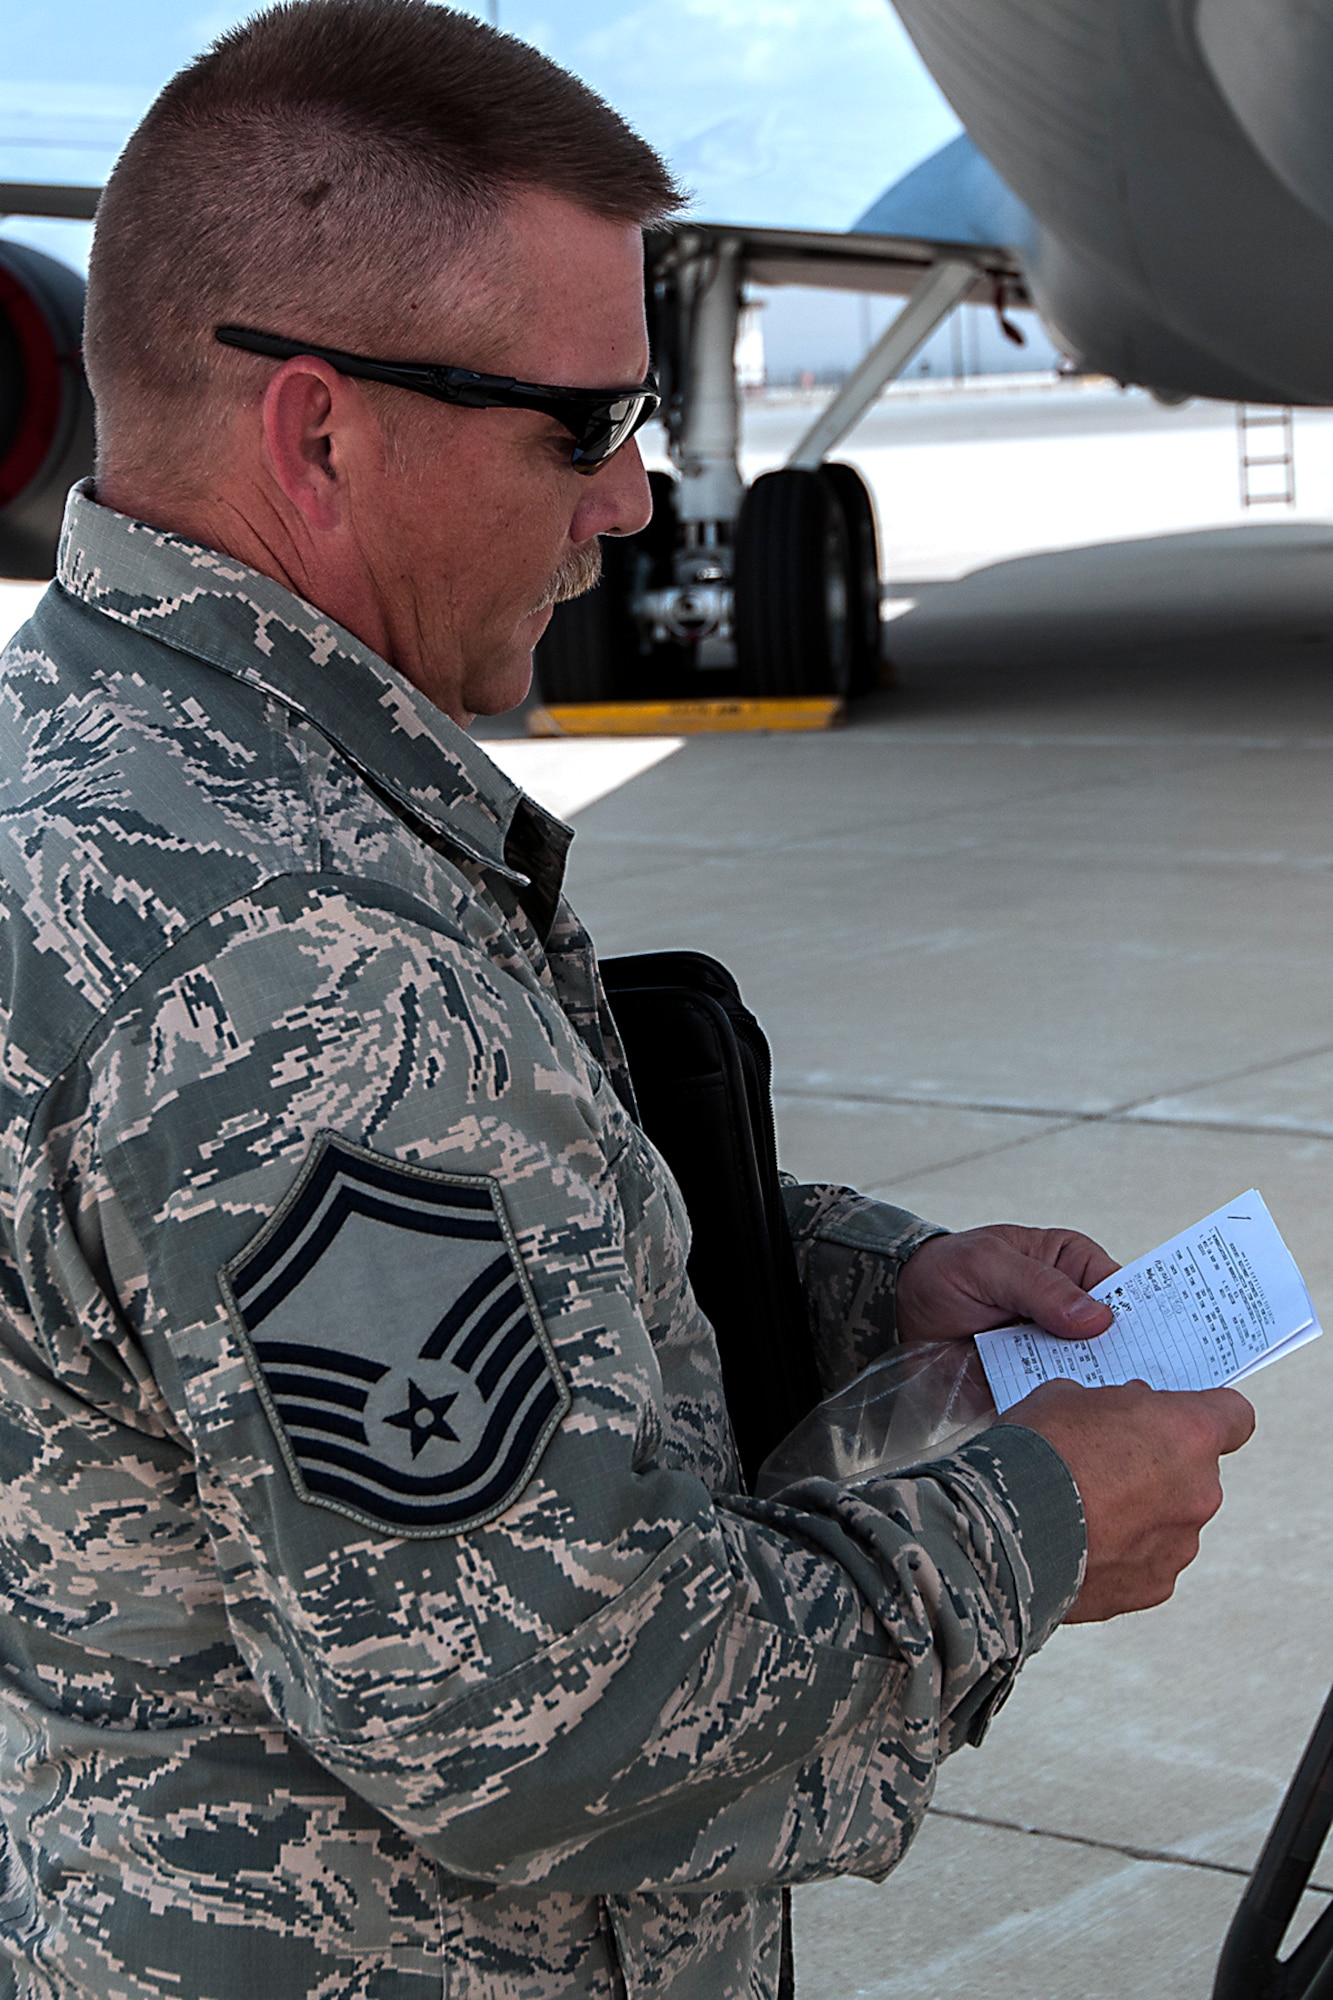 Senior Master Sgt. Michael Young, 434th Maintenance Group quality assurance inspector, examines the form for a stand in use on the flightline July 13, 2016 at Grissom Air Reserve Base, Ind. Young is making sure that the form was filled out correctly before the stand was used and that all safety precautions are being followed. (U.S. Air Force photo/Senior Airman Dakota Bergl) 